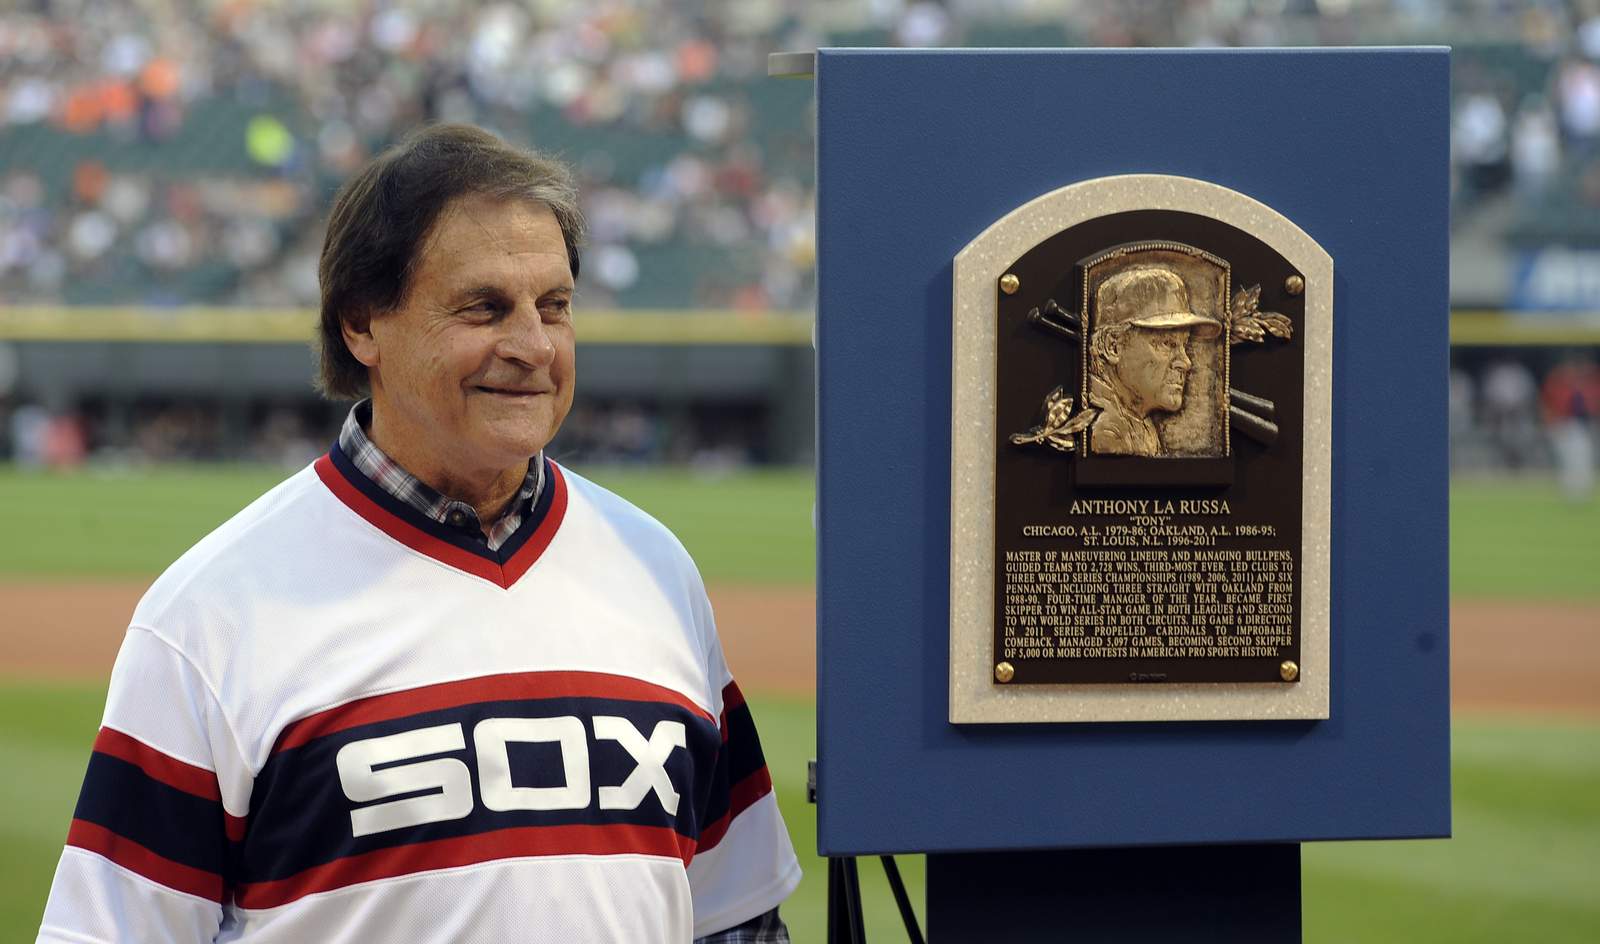 White Sox manager Tony La Russa charged with DUI again